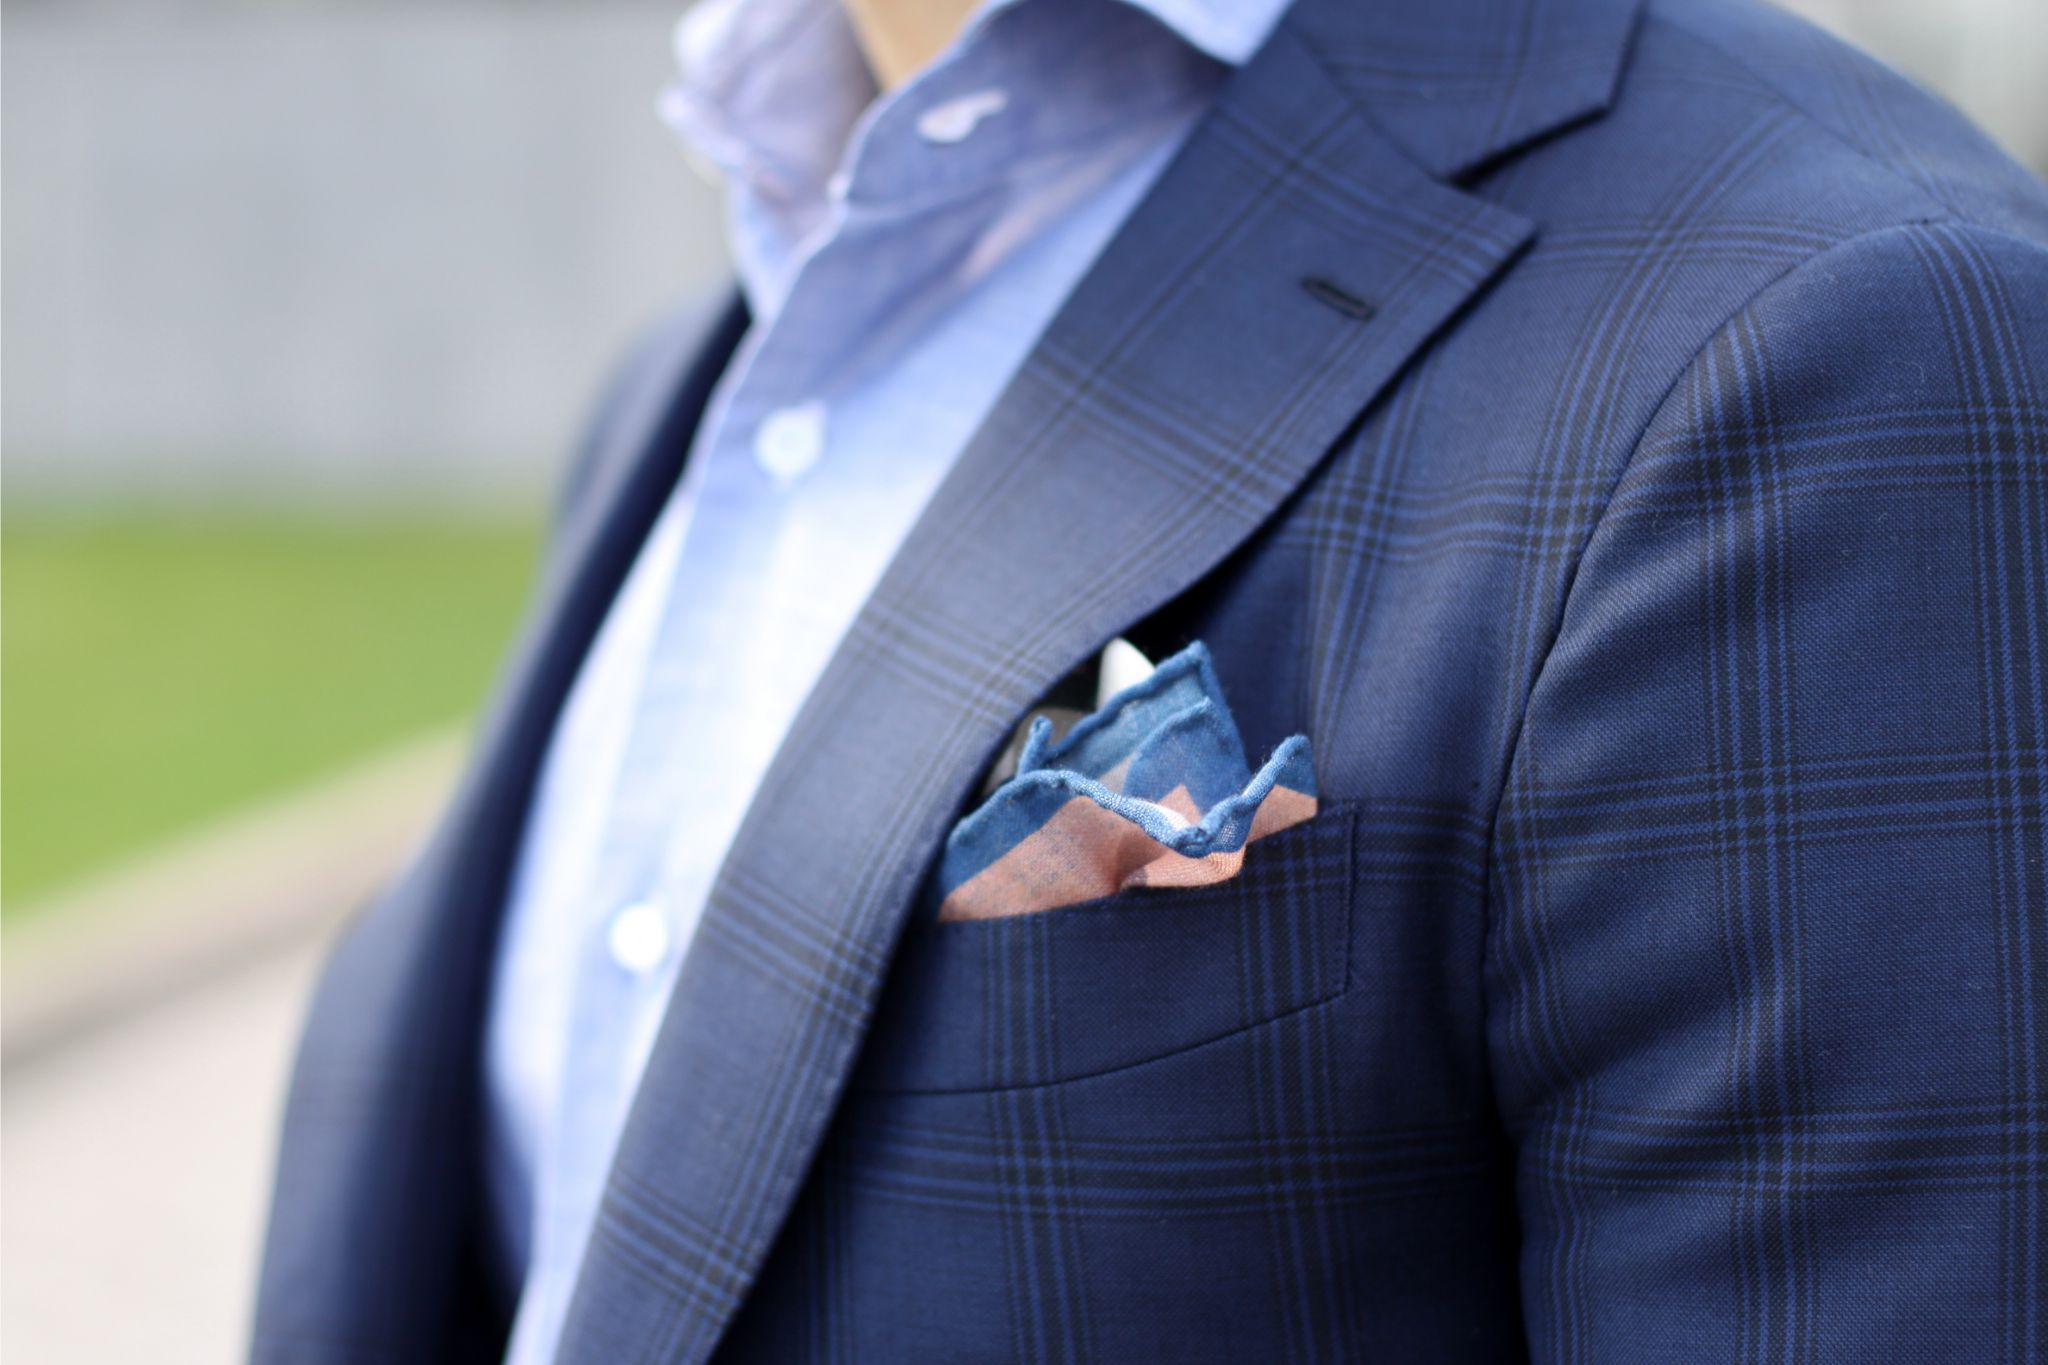 Christian Kimber pocket square with Isaia shirt and blue suit jacket